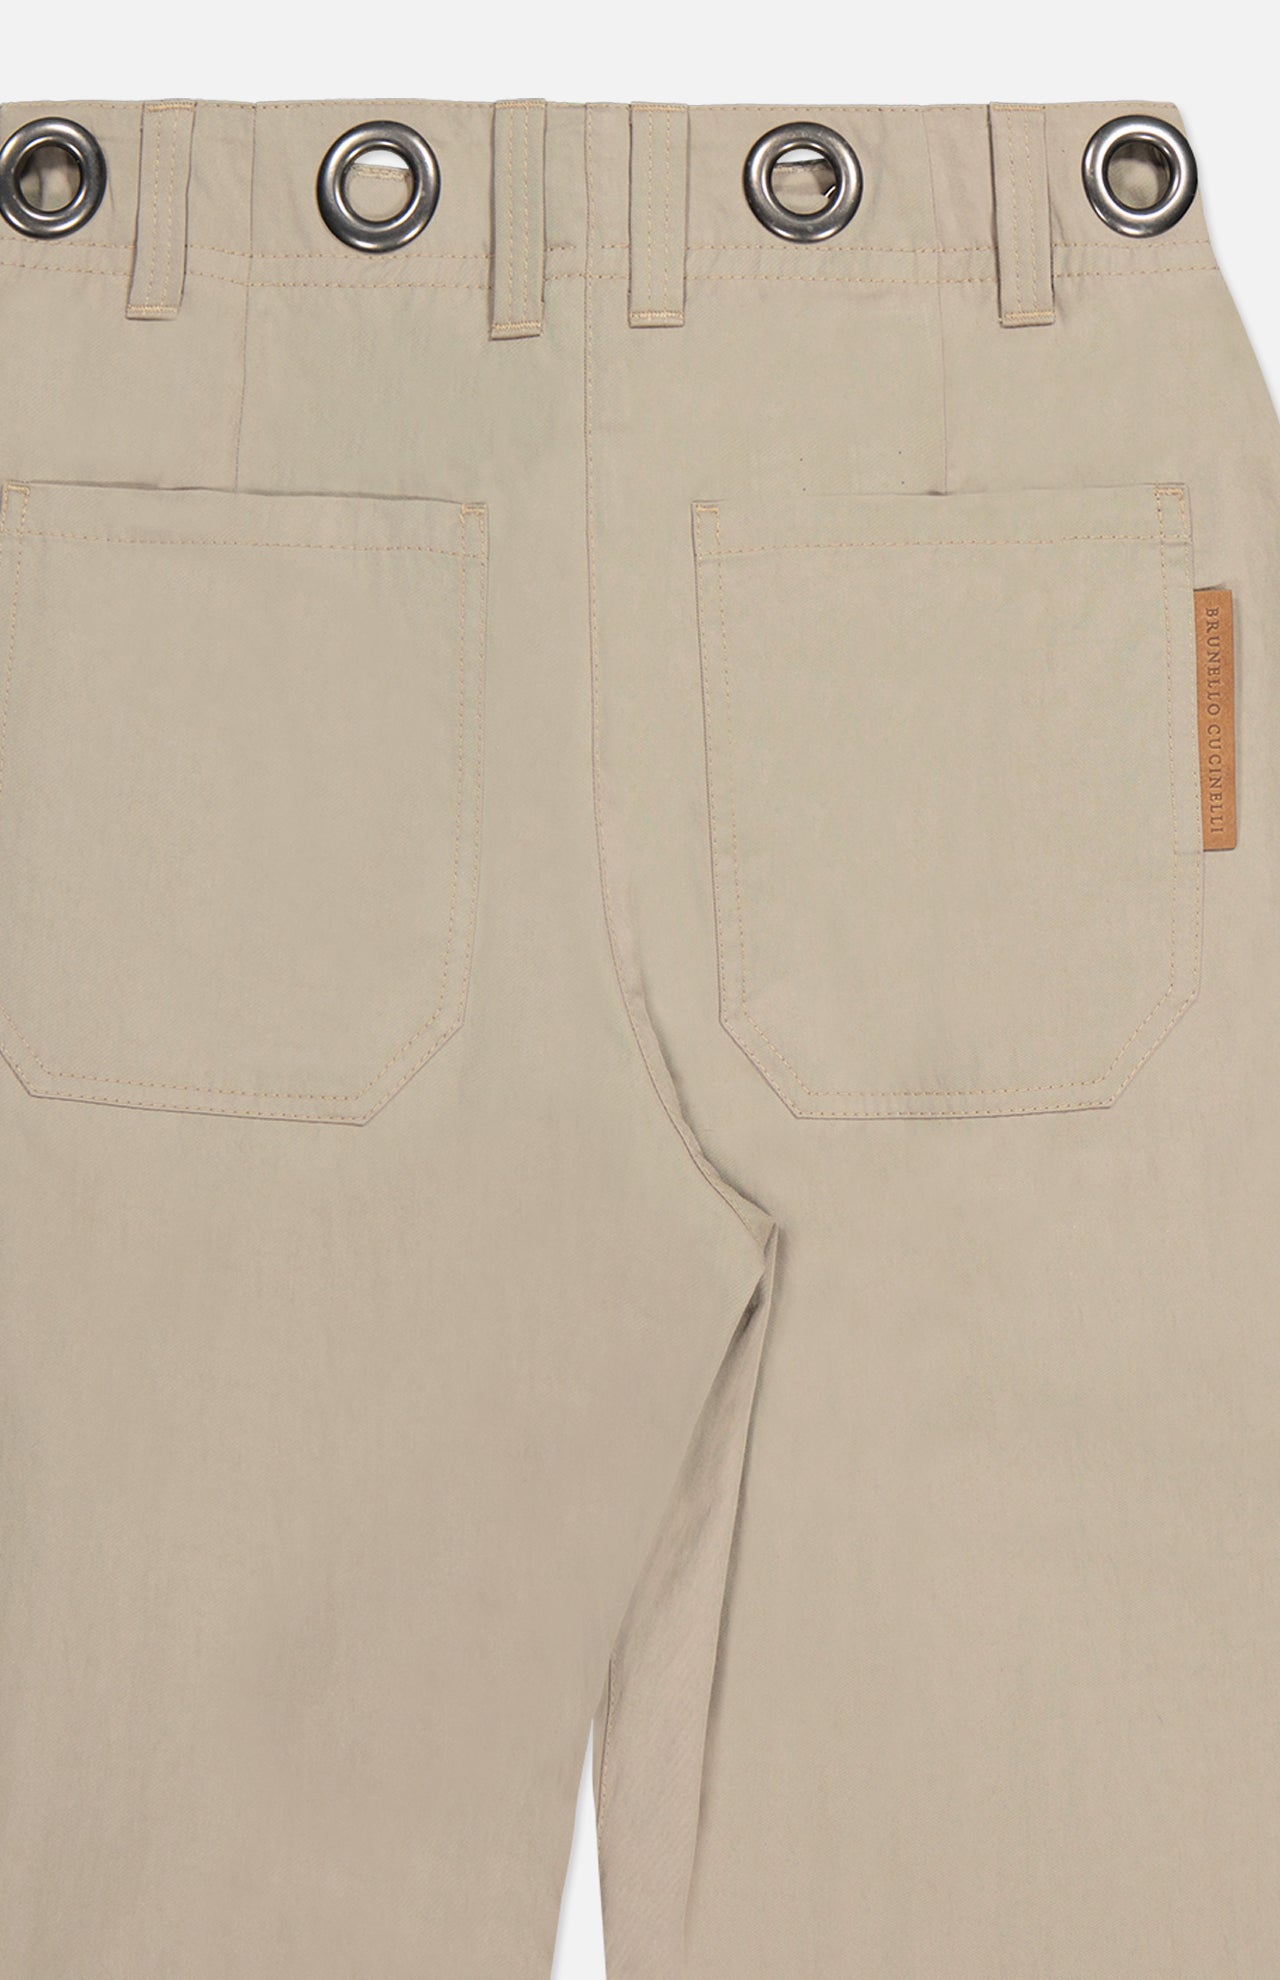 Brunello Cucinelli Women's Lightly Wrinkled Cotton Pant